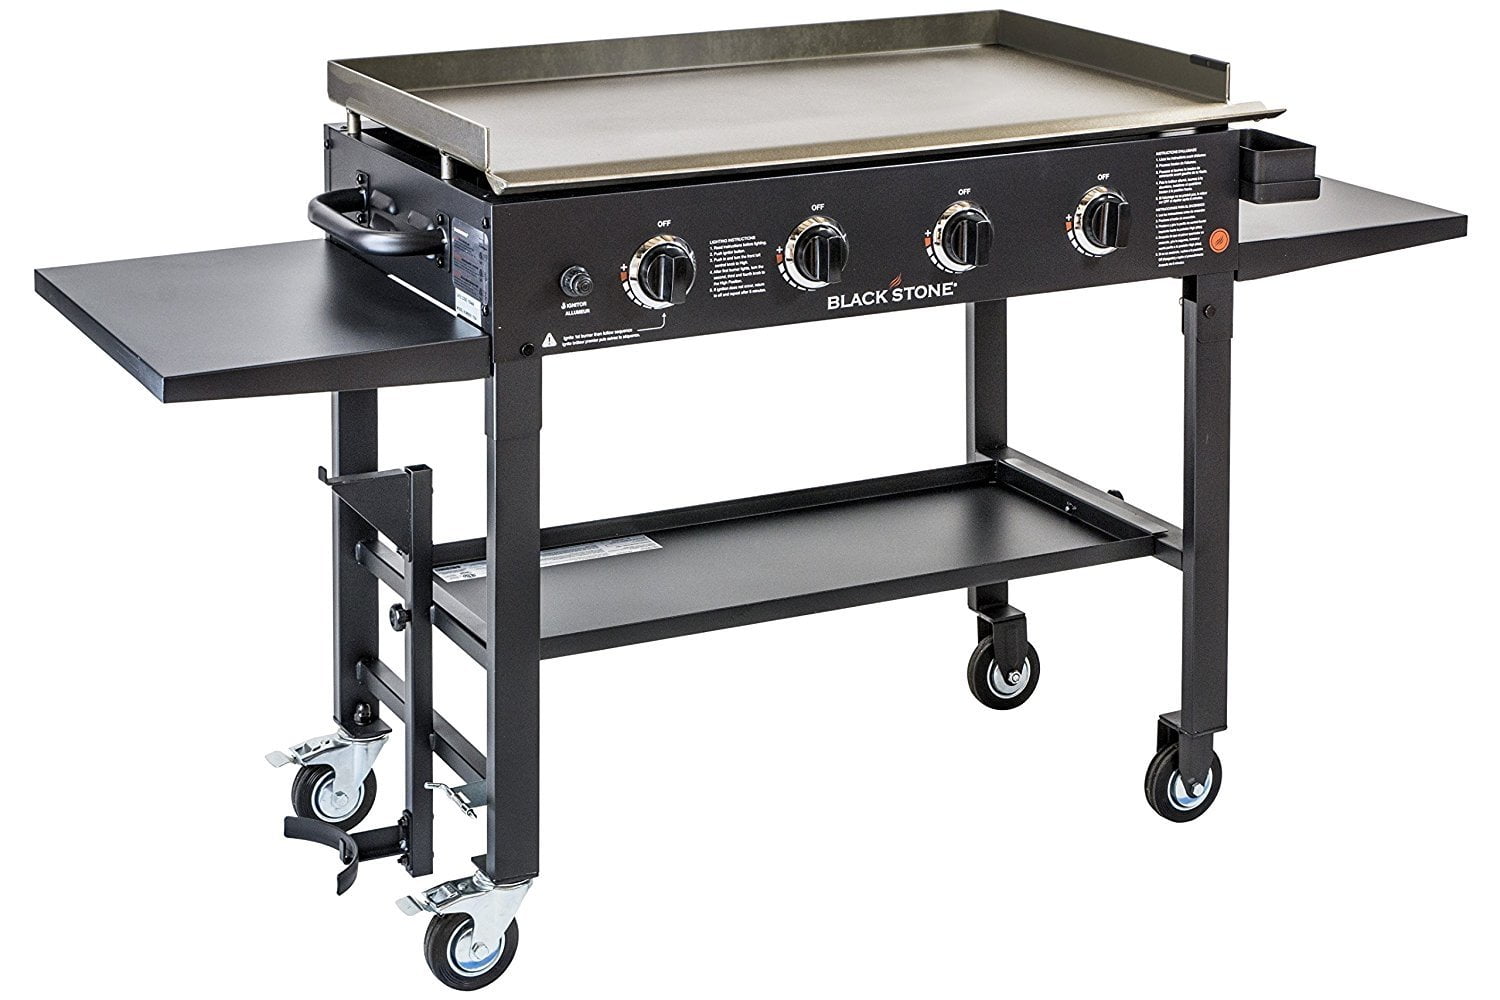 Blackstone 36 Inch Outdoor Flat Top Gas, Outdoor Propane Griddle Grill